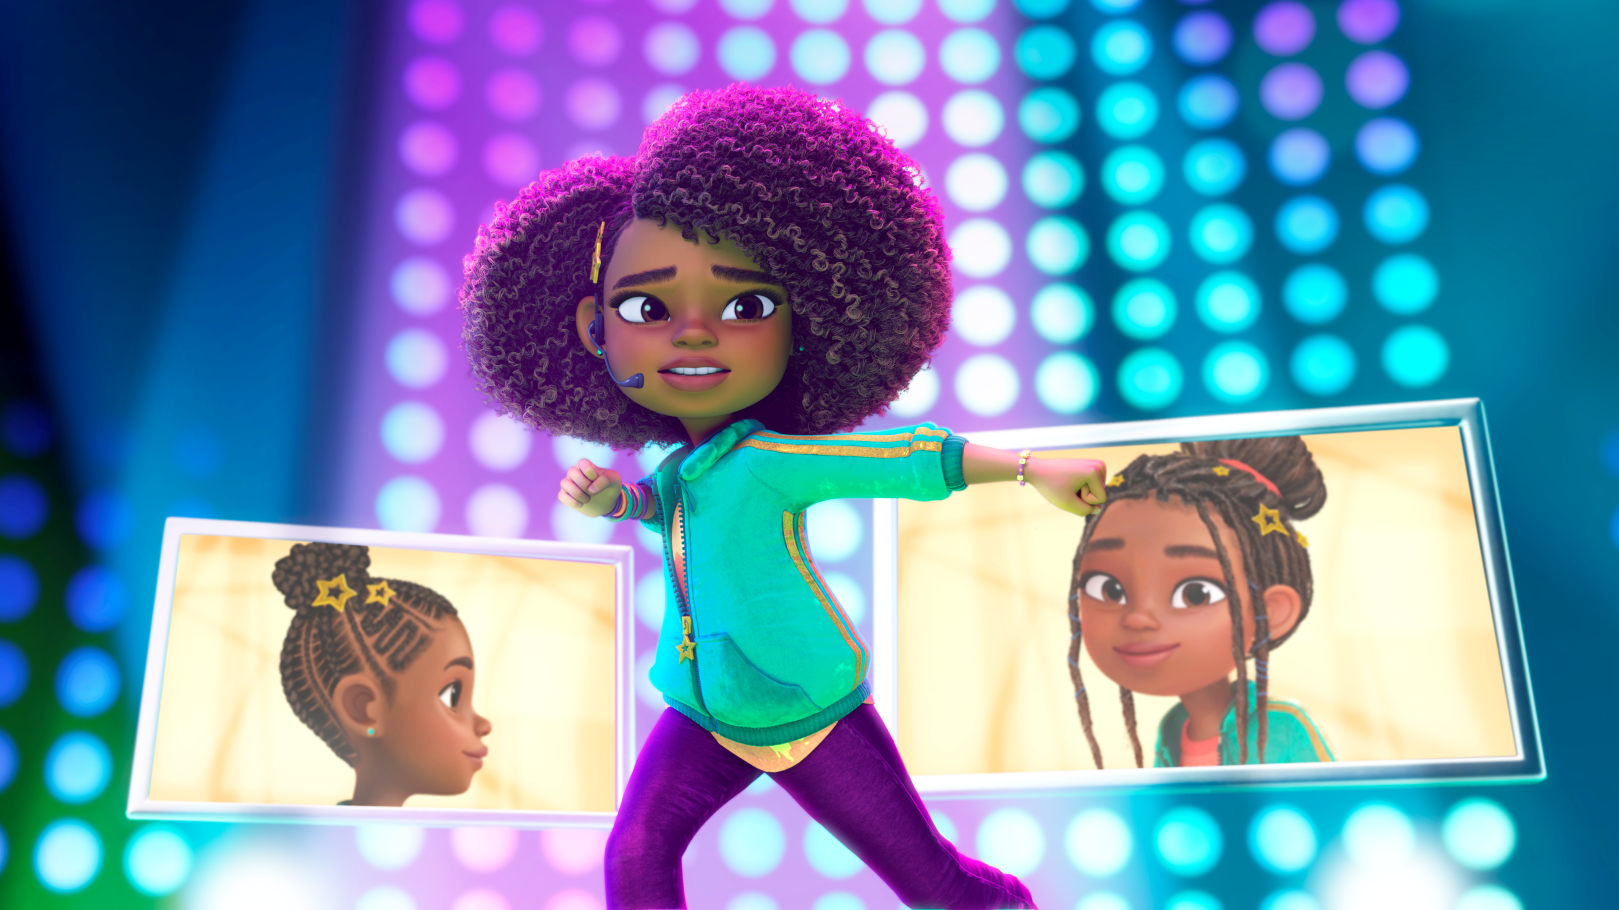 How Netflix’s ‘Karma’s World’ Addresses Microaggressions Black Girls Experience With Their Hair